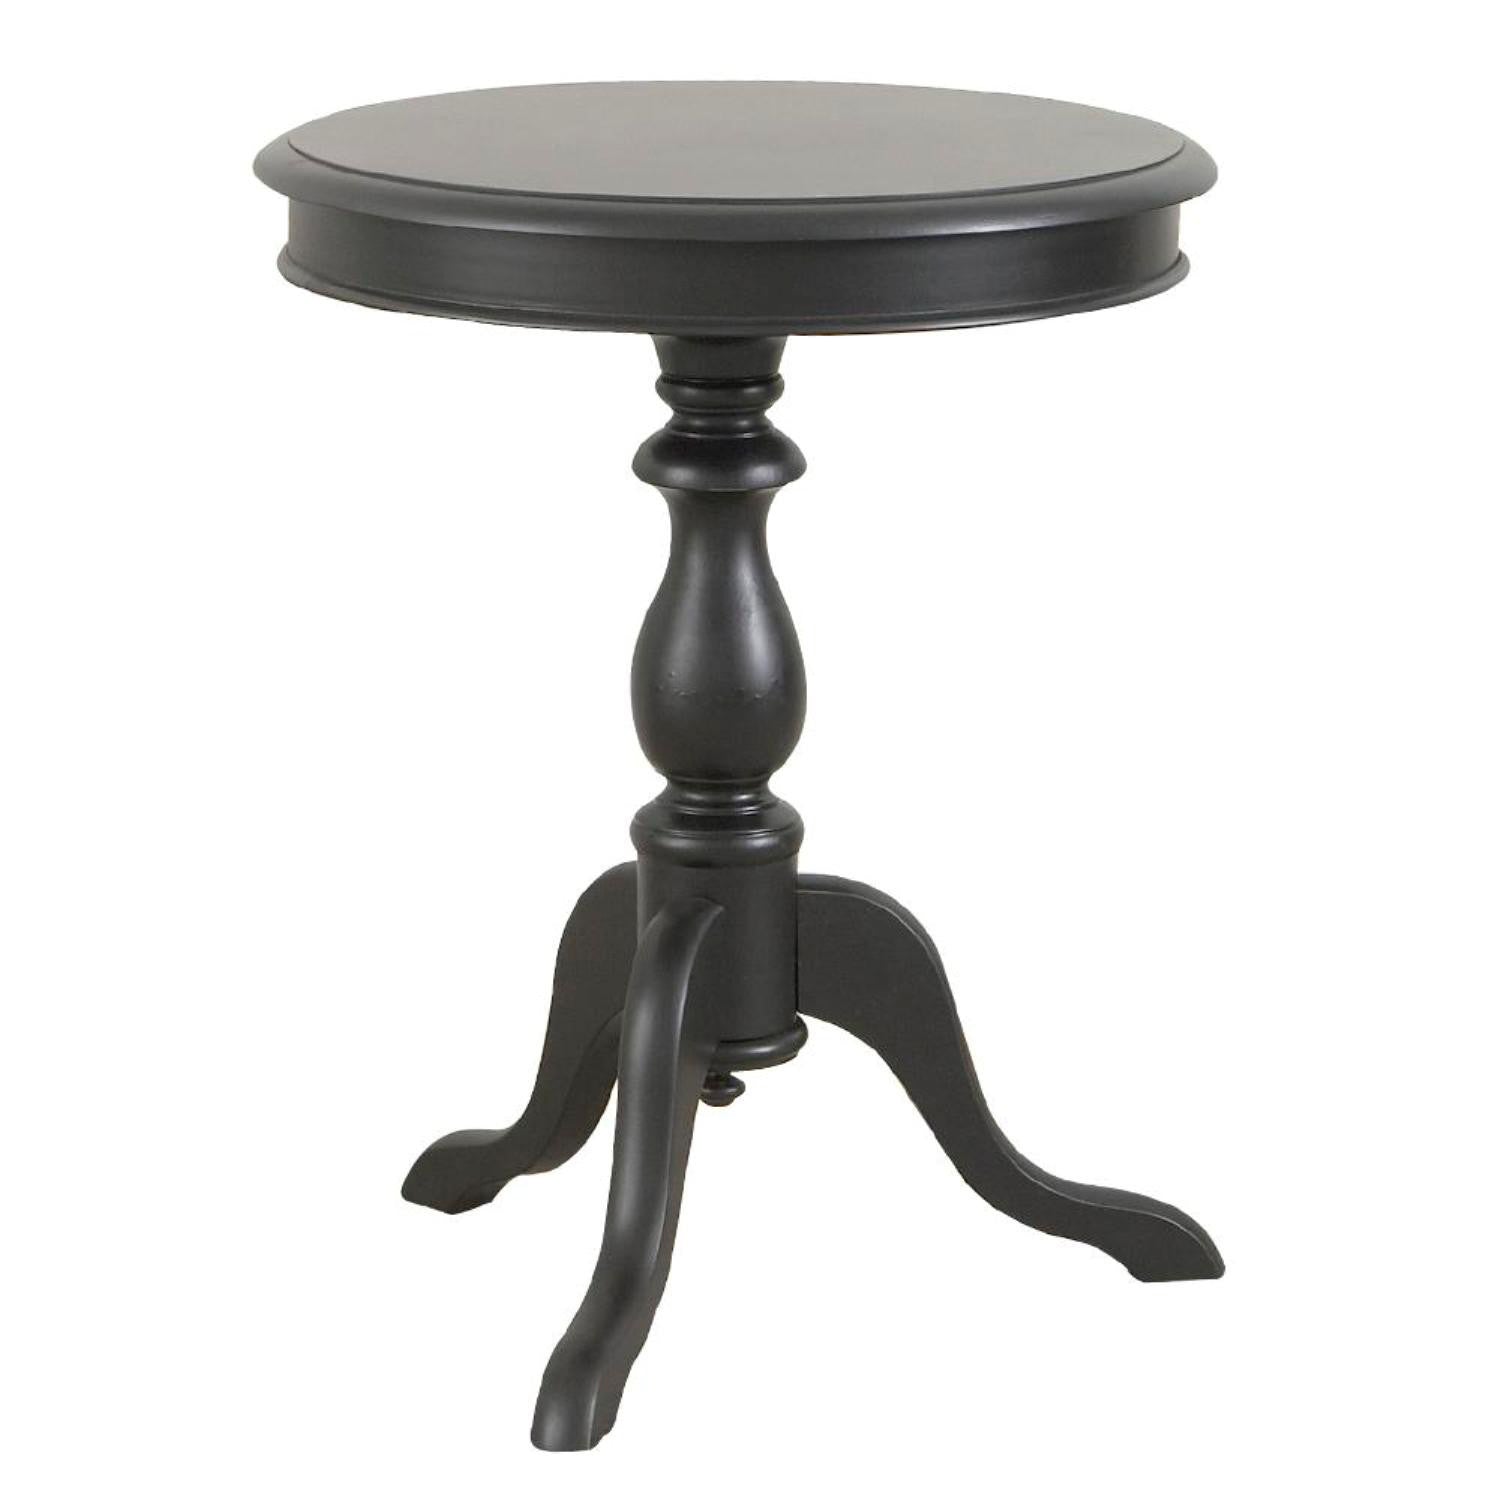 25" Black Manufactured Wood Round End Table